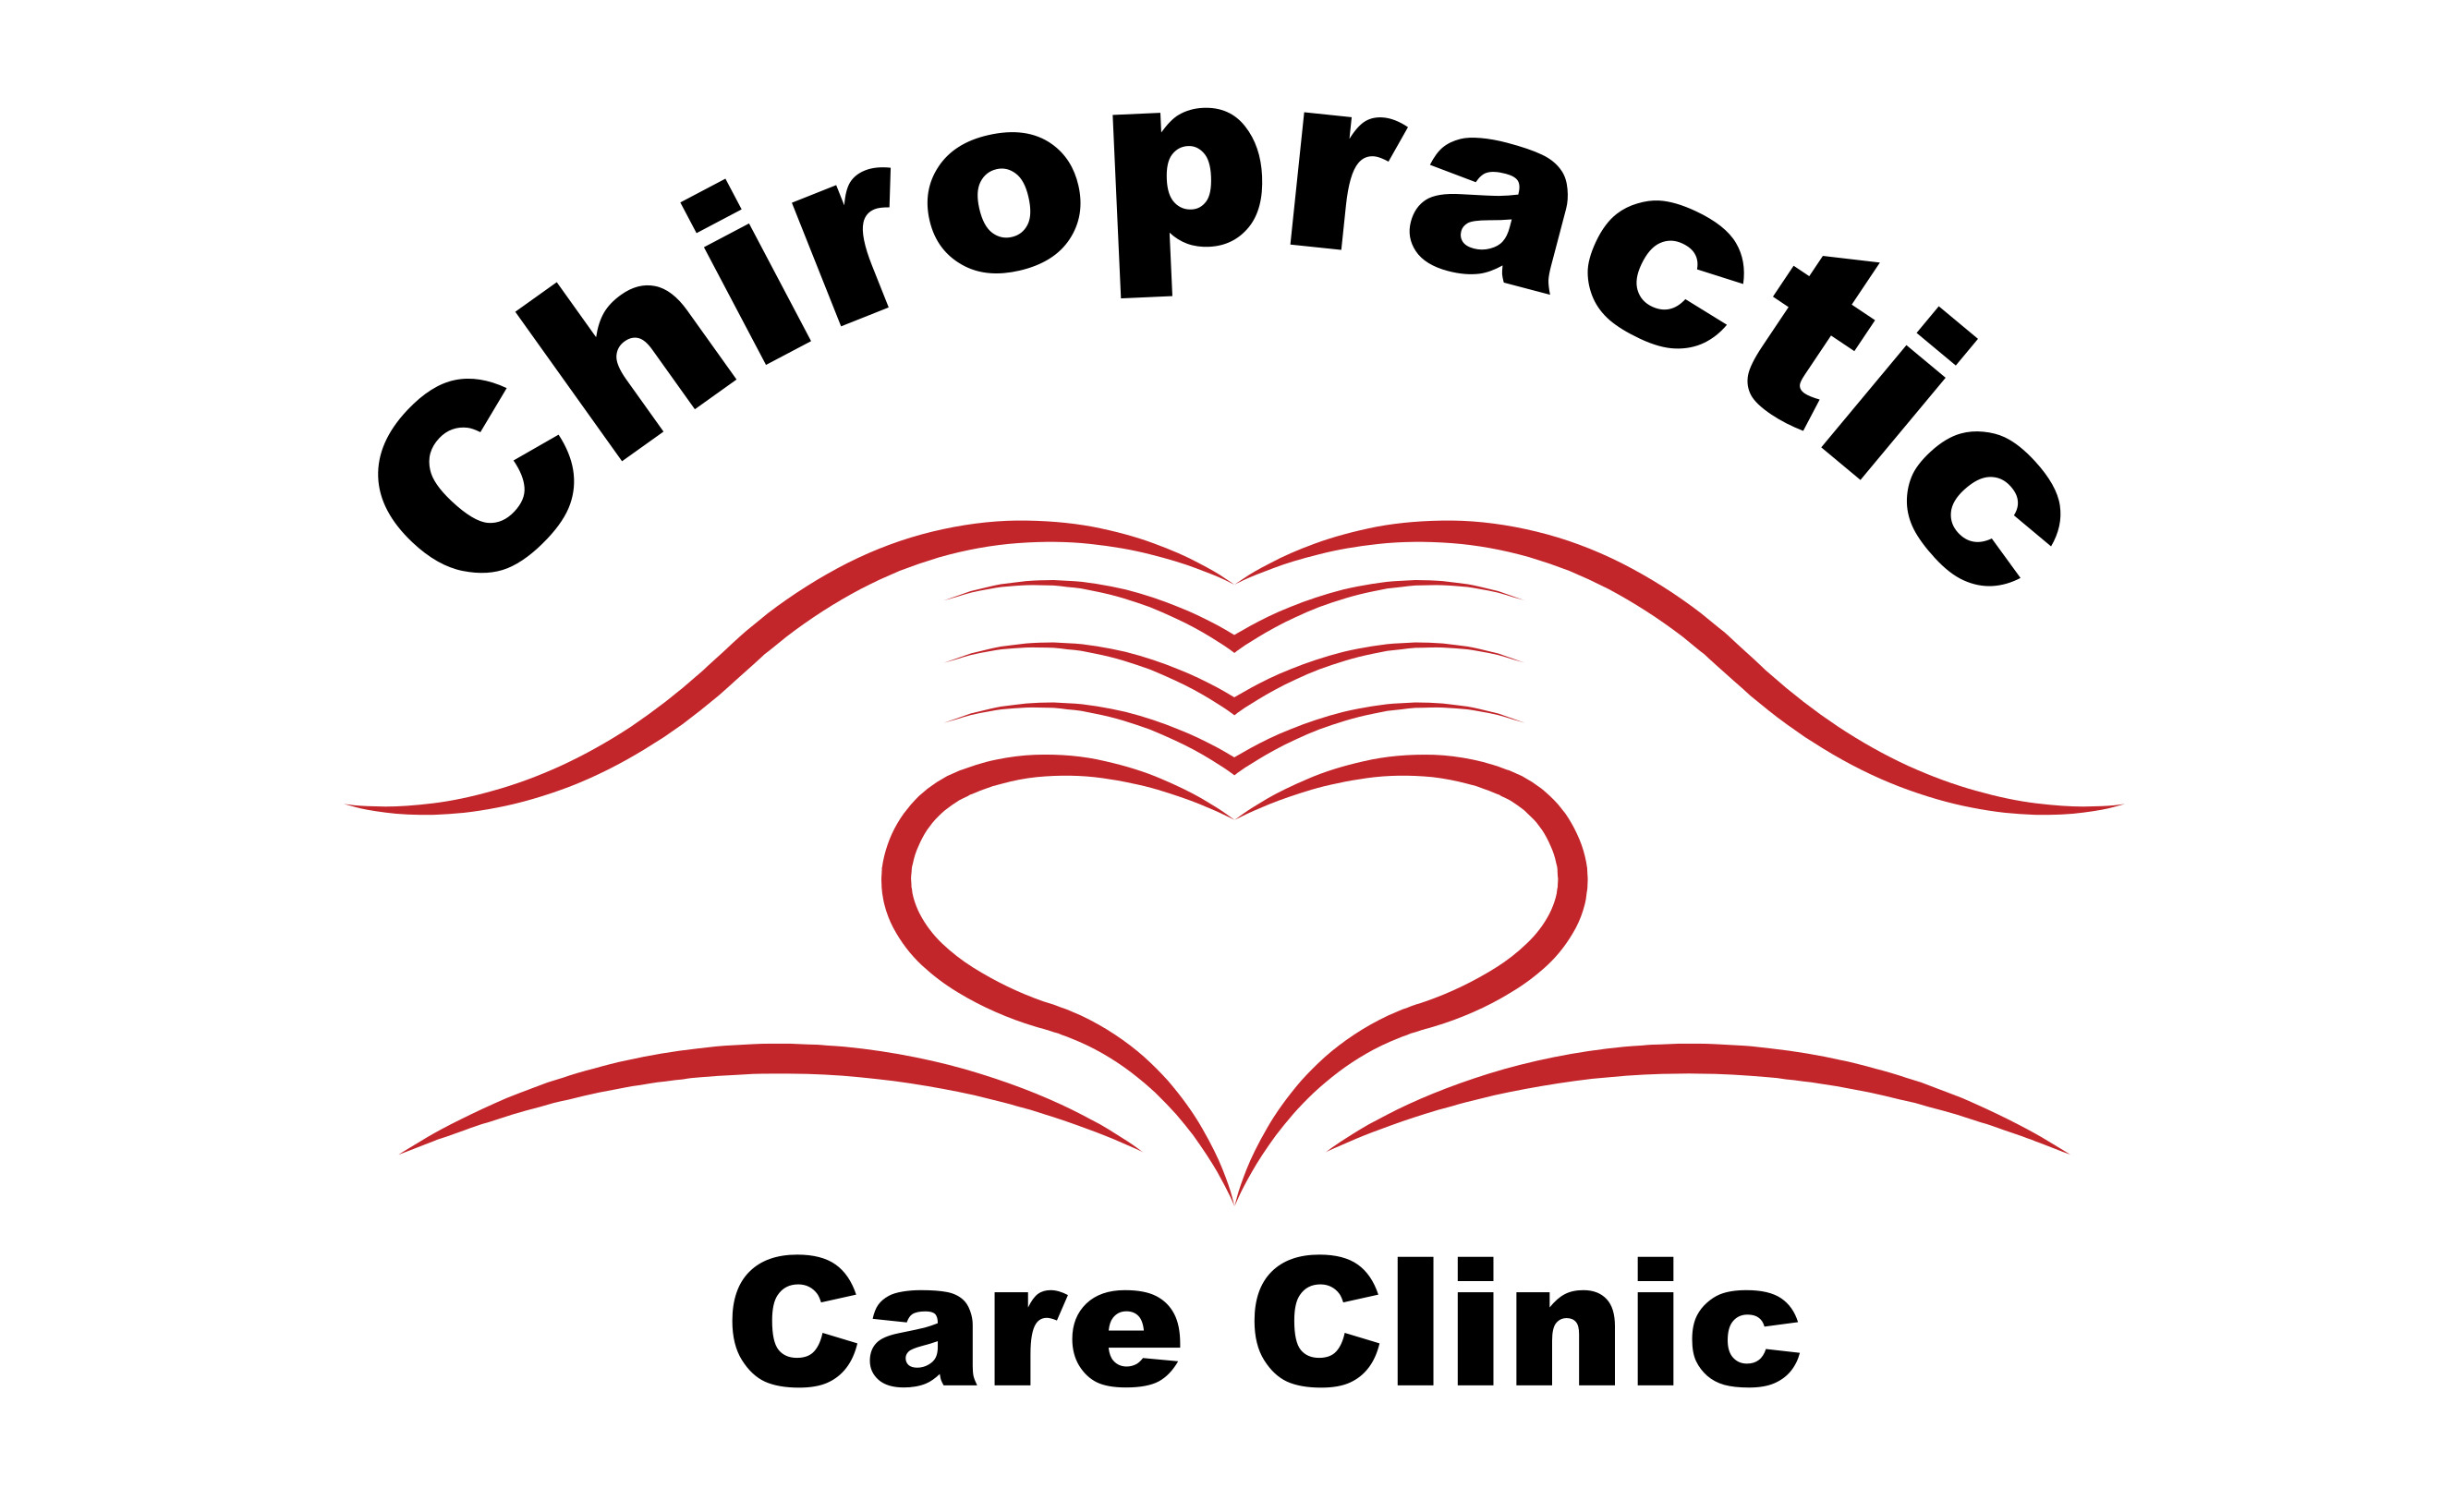 Chiropractic Care Clinic